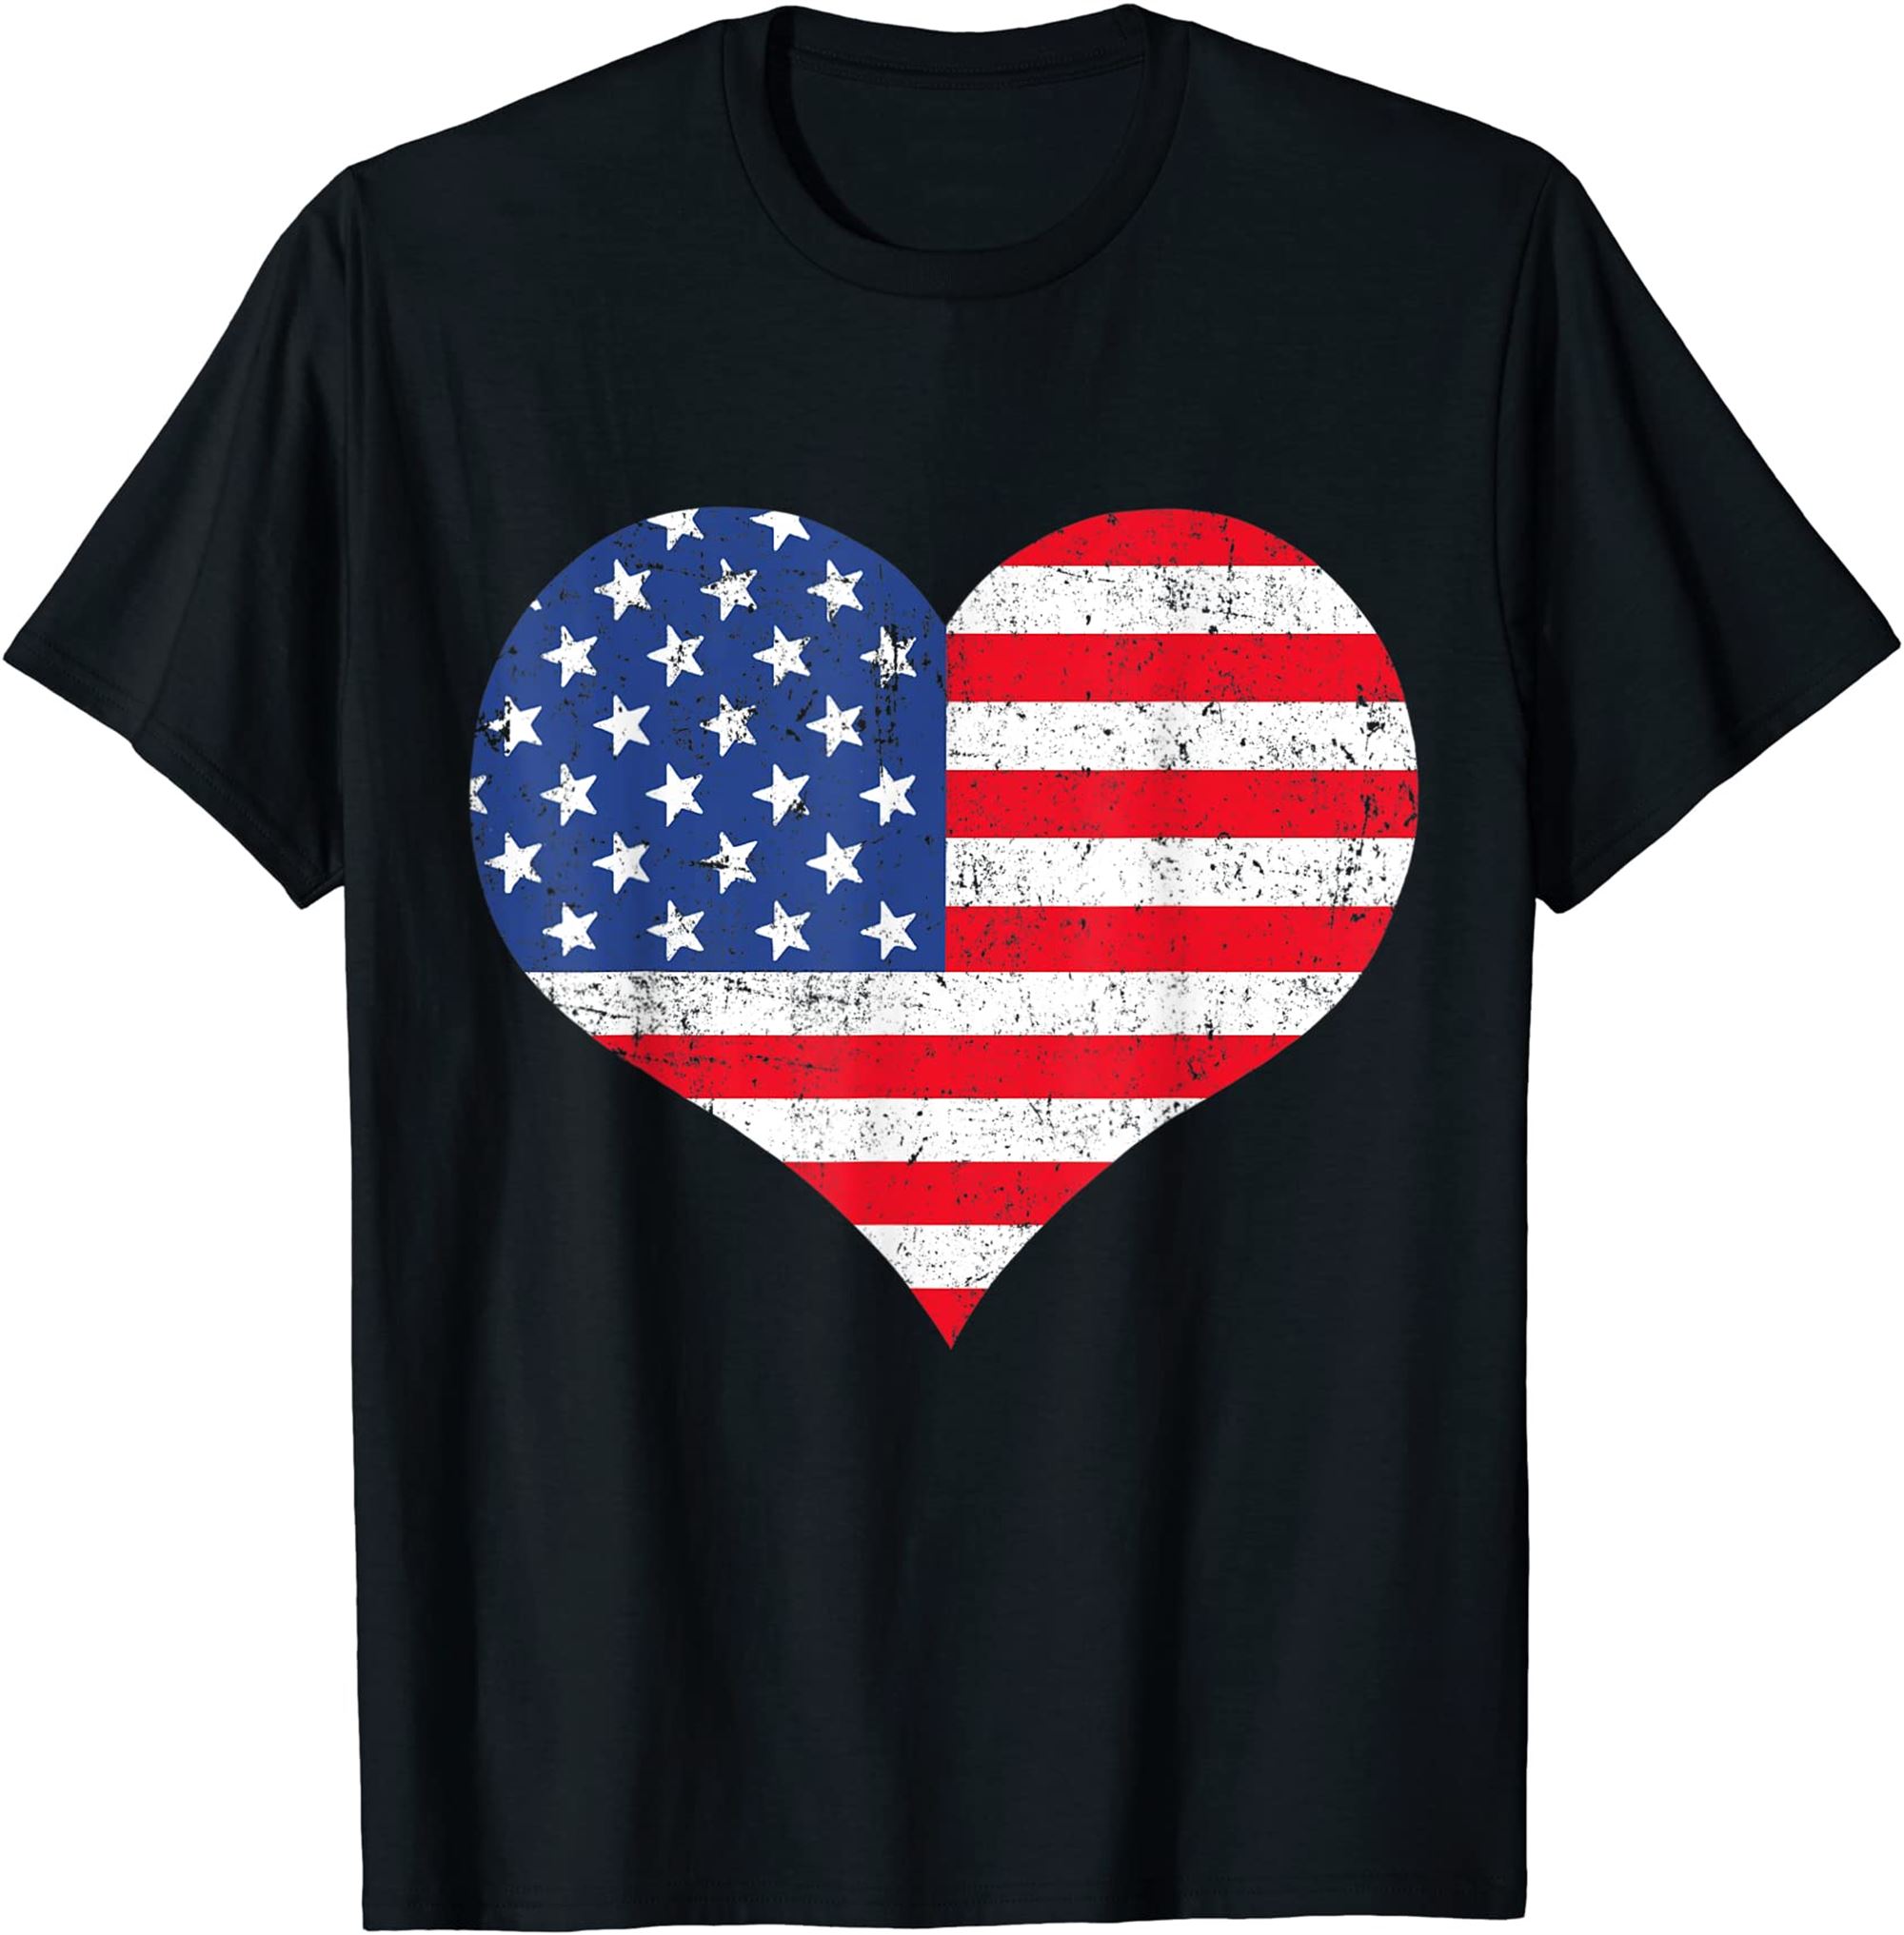 American Flag Heart 4th Of July Usa Patriotic Pride T-shirt Full Size Up To 5xl